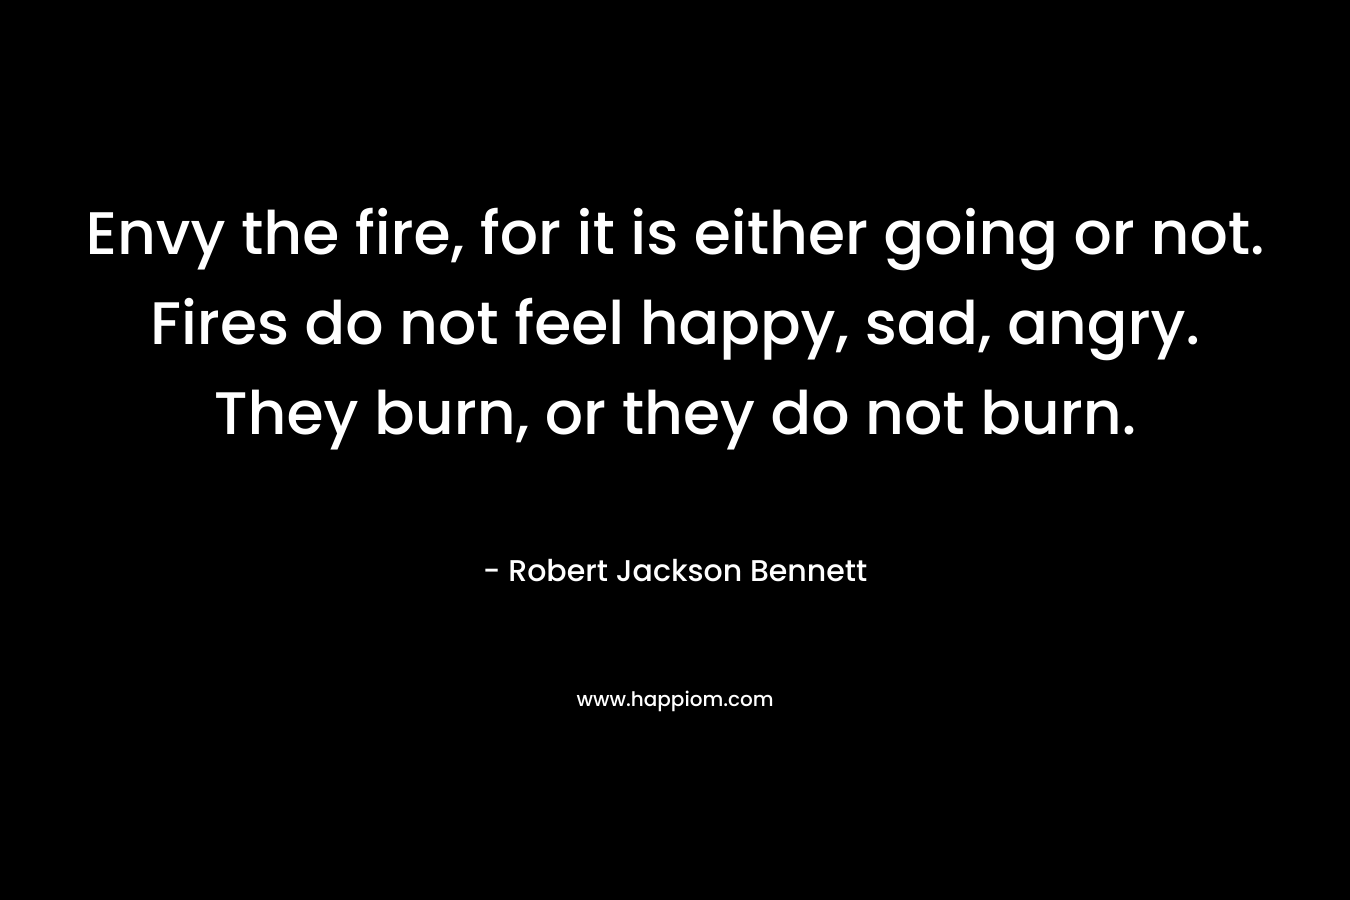 Envy the fire, for it is either going or not. Fires do not feel happy, sad, angry. They burn, or they do not burn.